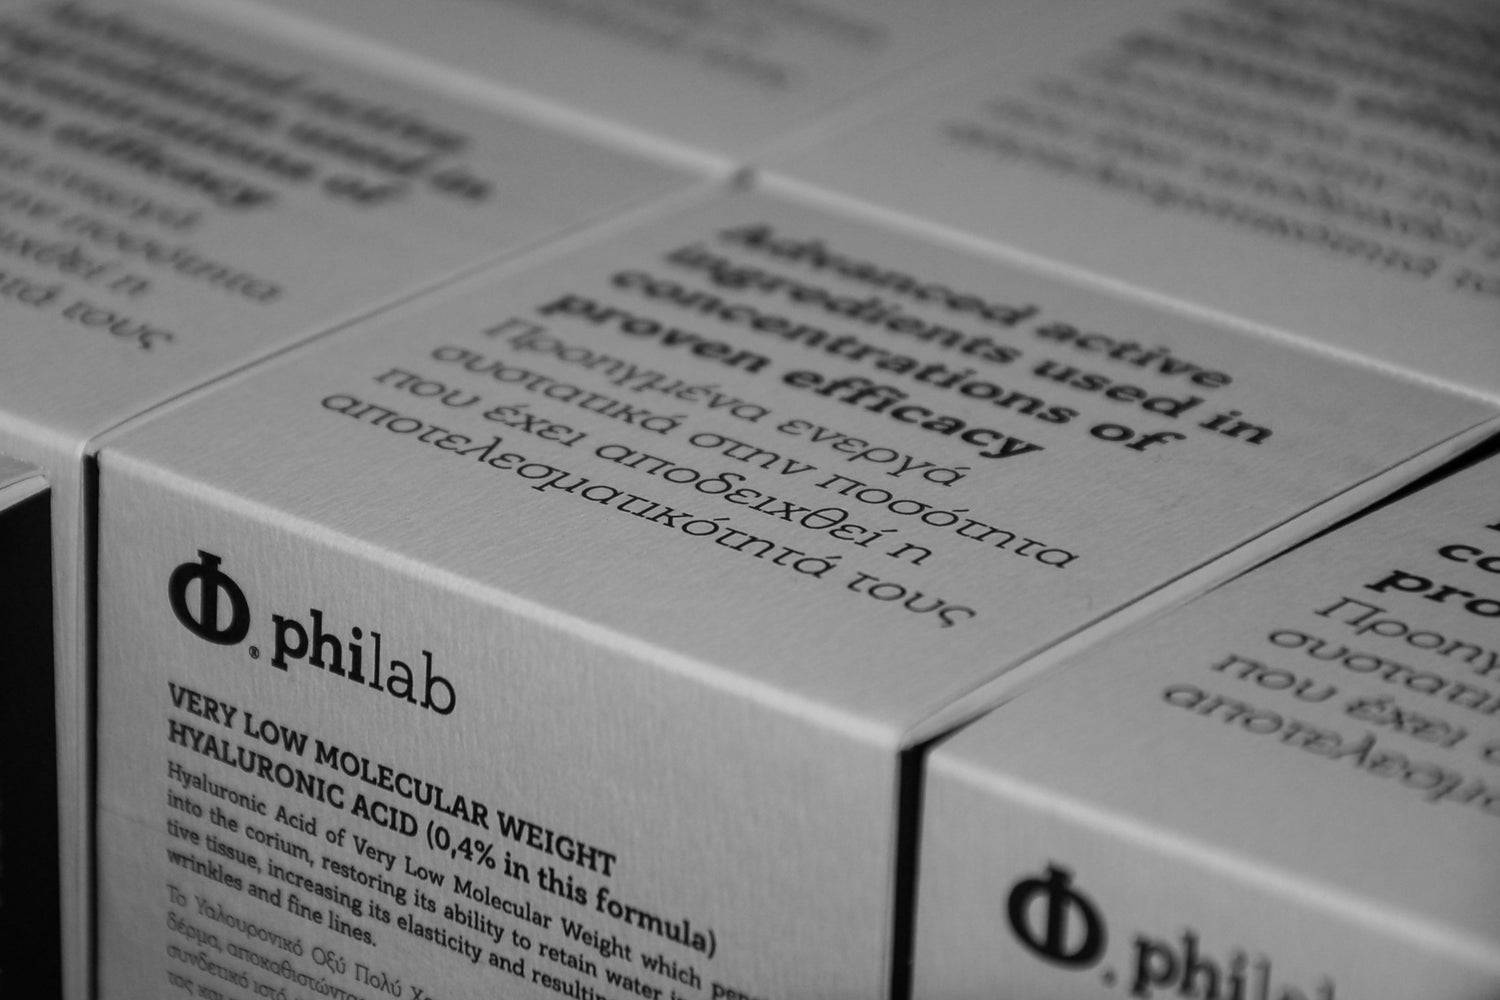 "Stack of Philab skincare boxes with detailed product information, focused in monochrome.